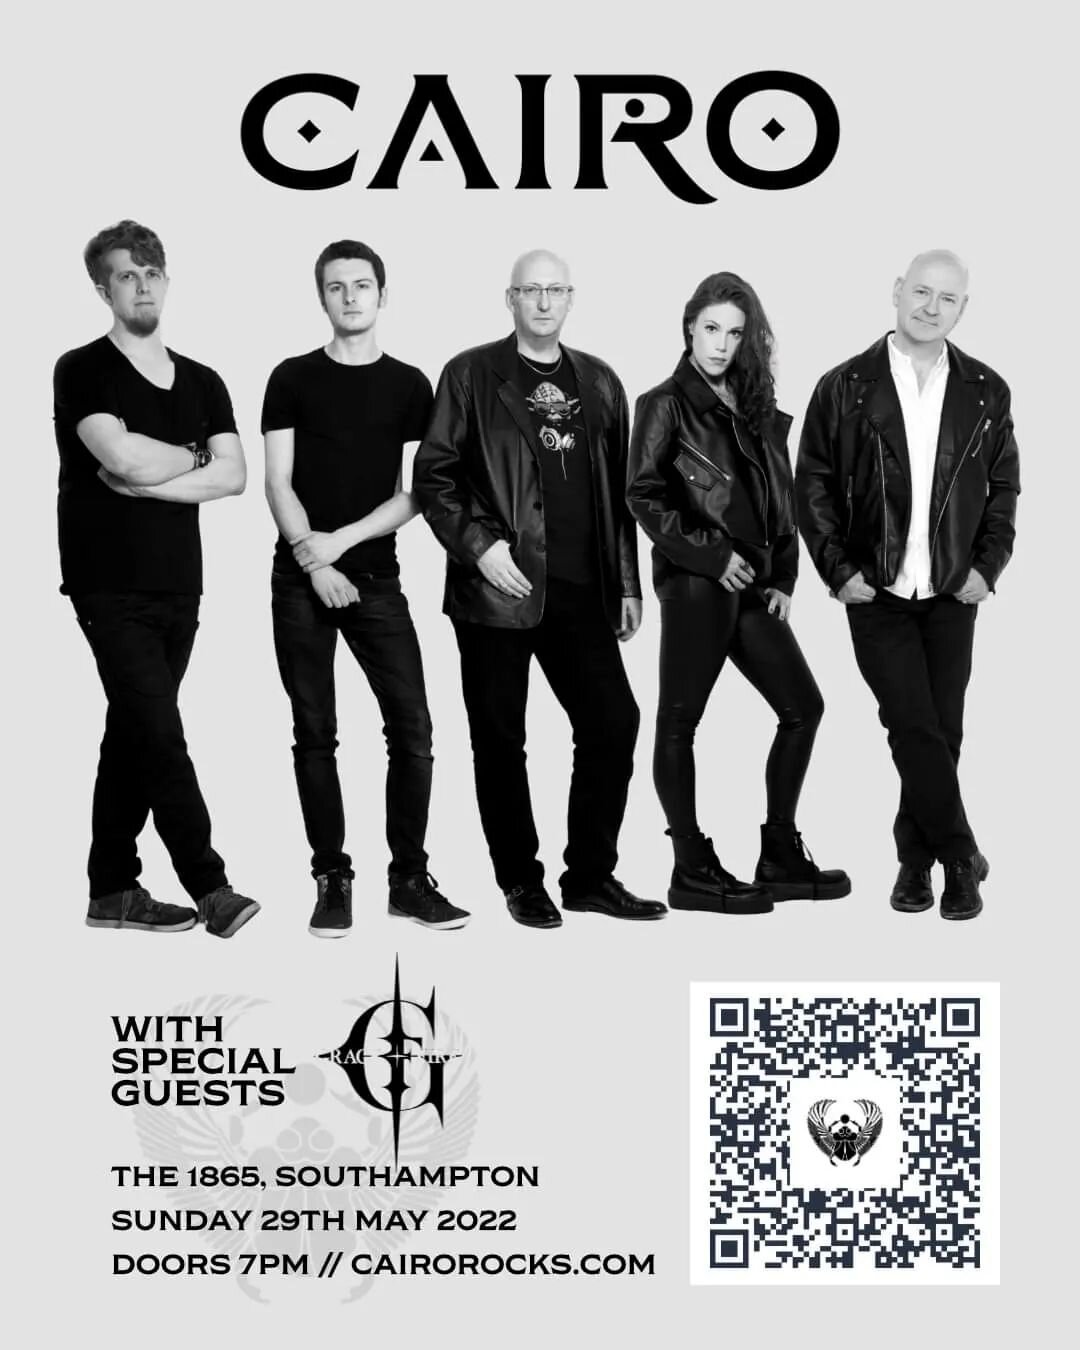 Double trouble on the 29th of May!

I'm supporting my own band at The 1865 in Southampton! Grab your tickets now using the QR code!